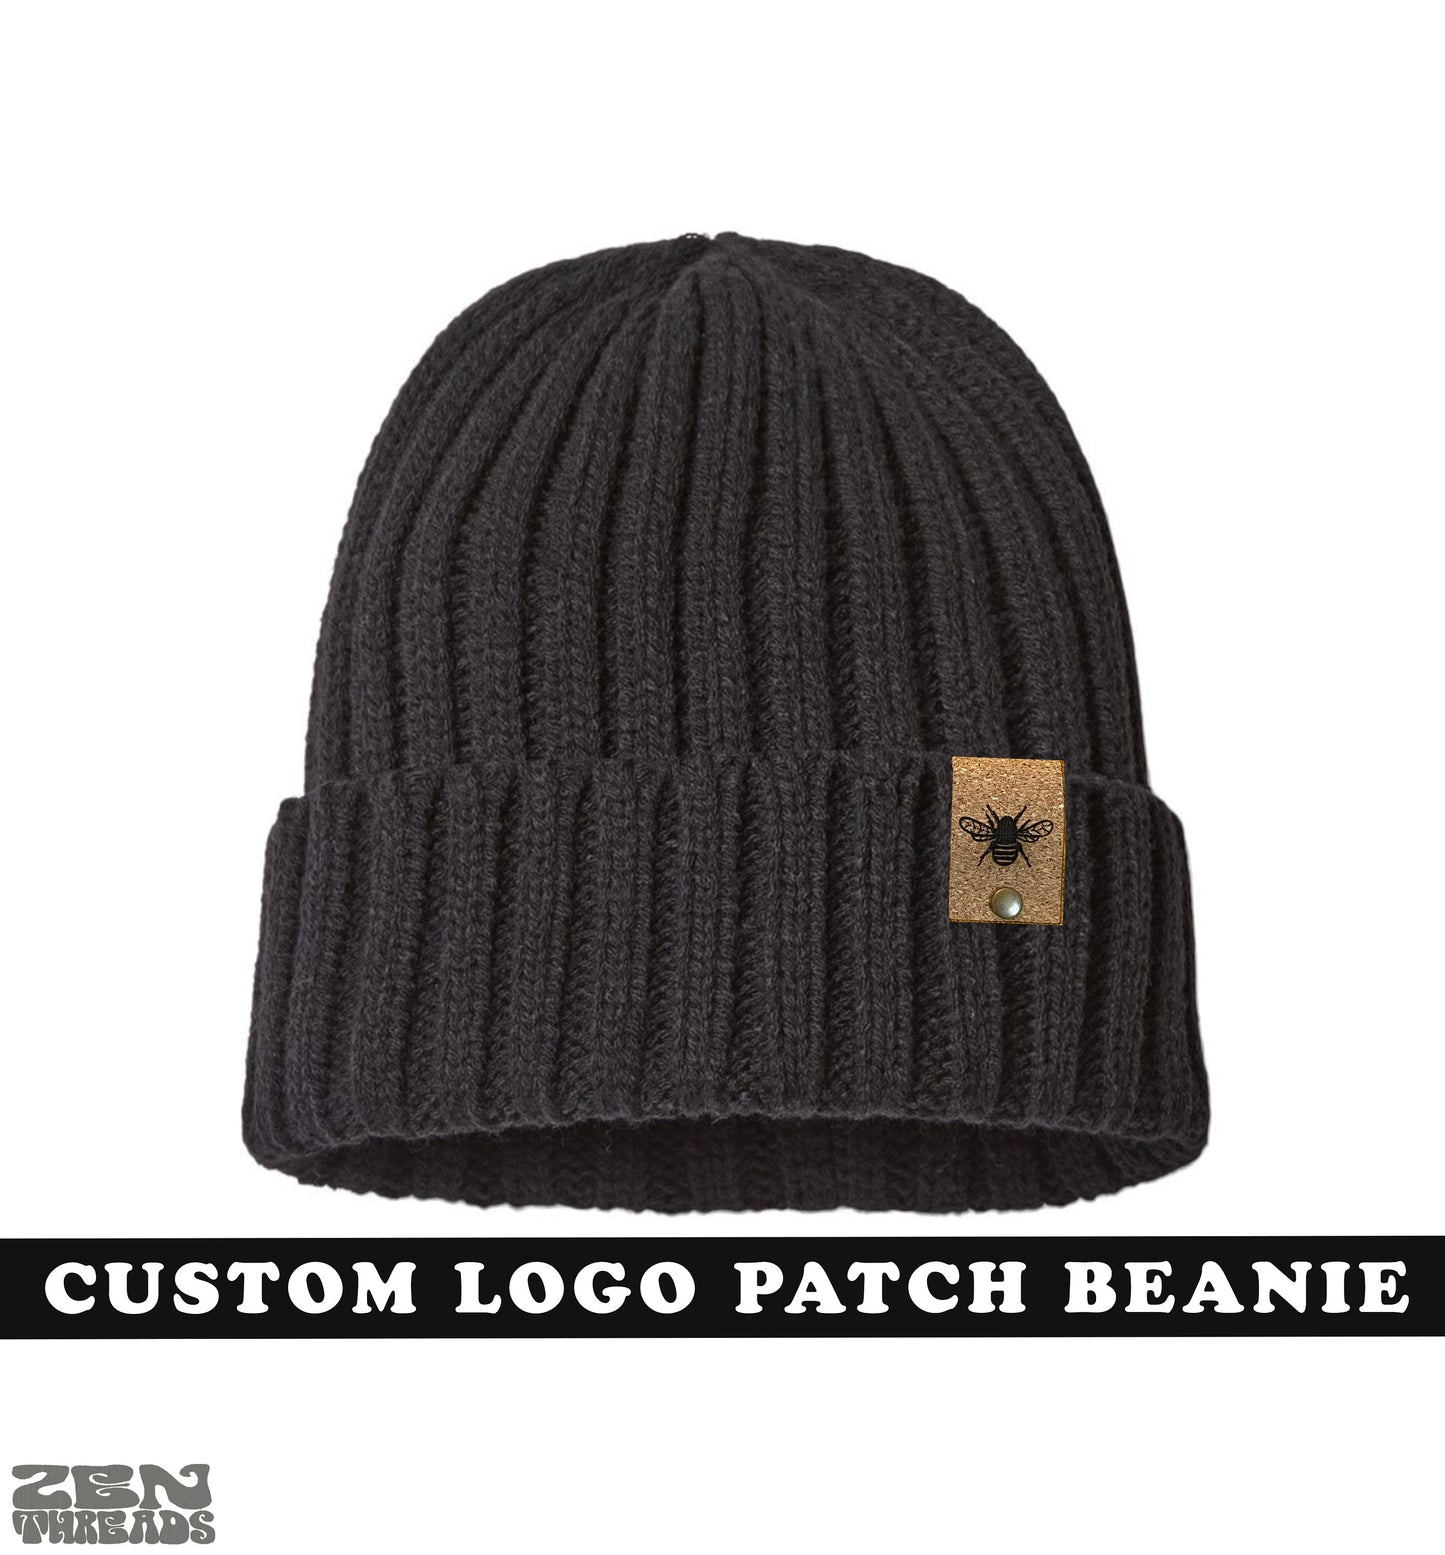 Sustainable CUSTOM PATCH Beanie Leather leatherette vegan laser engraved customized personalized winter hat logo business swag rivet tag hat